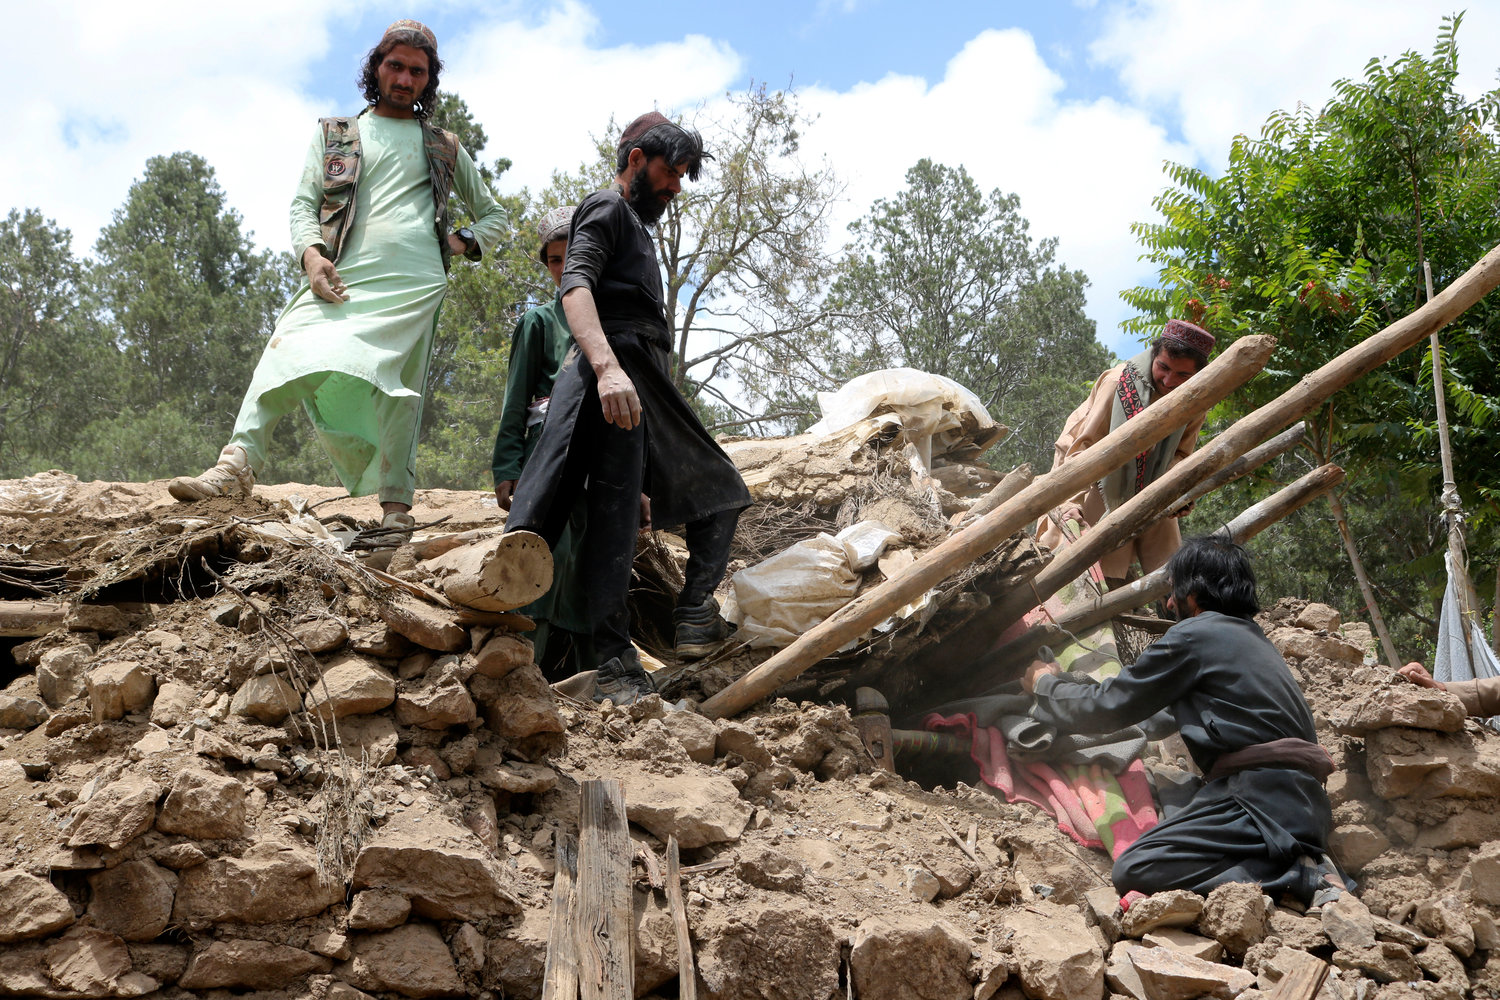 Afghan villagers collects belongings from under the rubble of a home that was destroyed in an earthquake in the Spera District of the southwestern part of Khost Province, Afghanistan, Wednesday, June 22, 2022. A powerful earthquake struck a rugged, mountainous region of eastern Afghanistan early Wednesday, killing at least 1,000 people and injuring 1,500 more in one of the country's deadliest quakes in decades, the state-run news agency reported. (AP Photo)